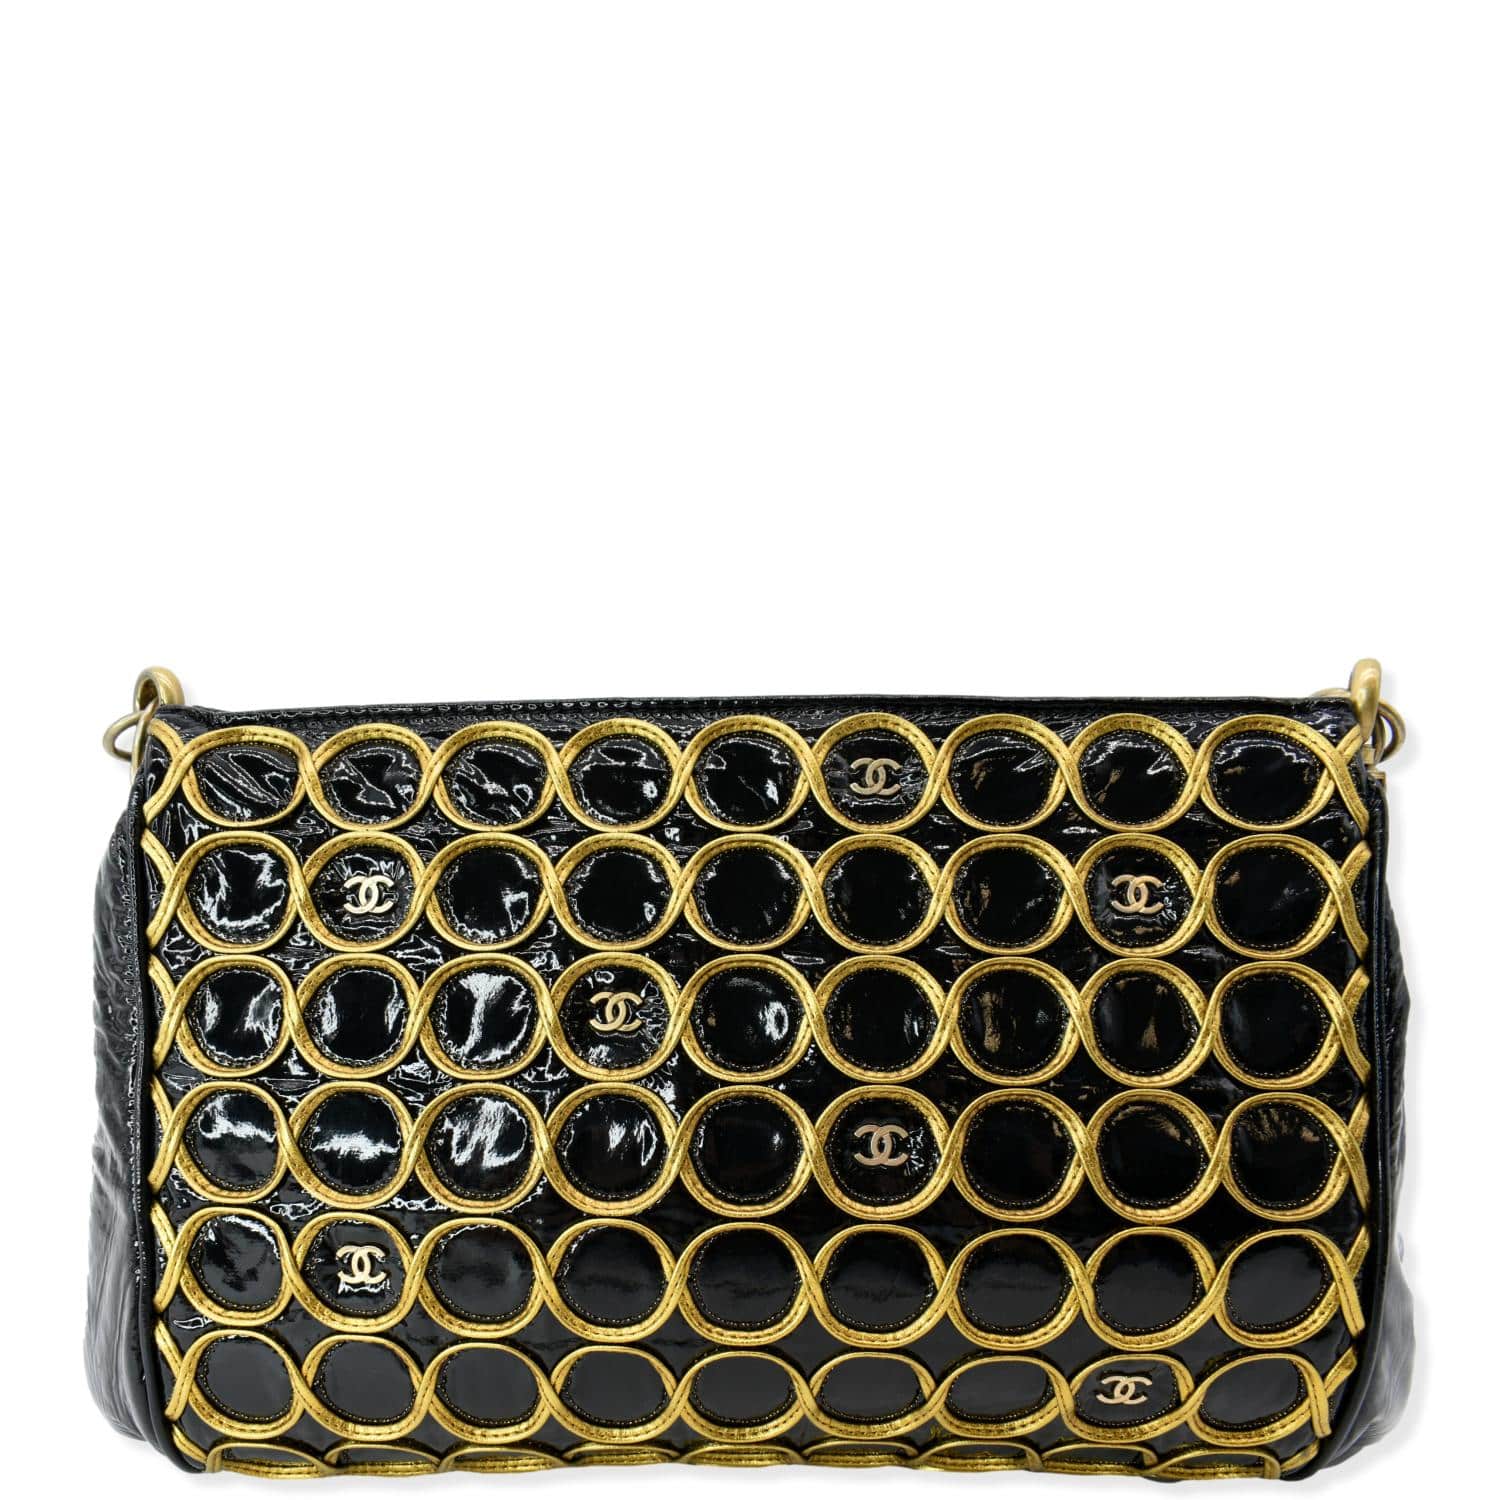 Chanel black and gold wallet/clutch with leather chain strap at